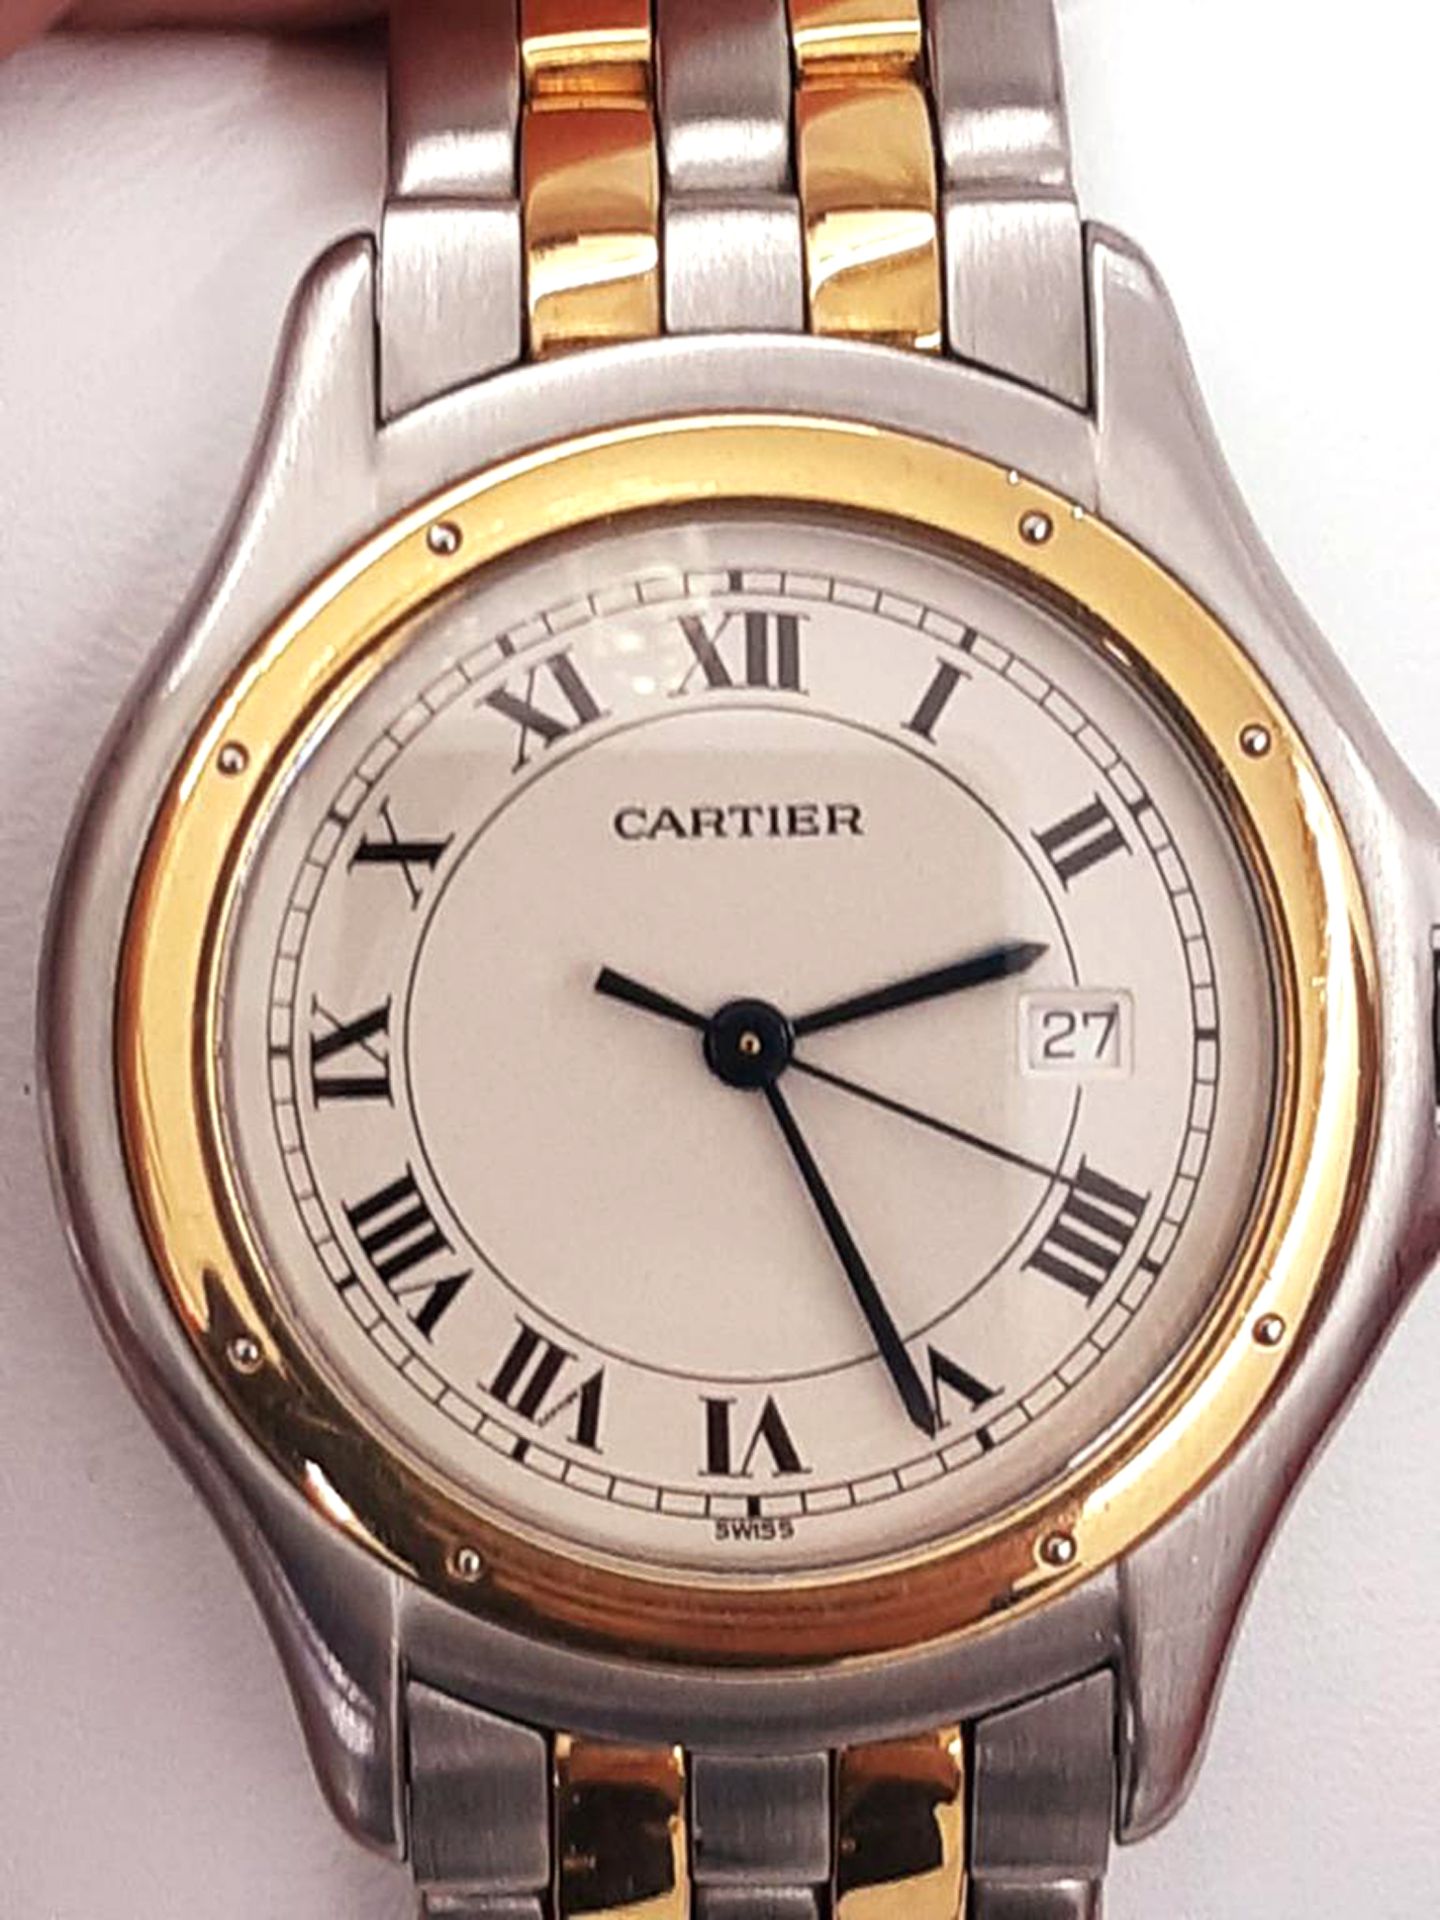 CARTIER COUGAR WATCH IN STEEL AND GOLD 33mm - Image 2 of 6